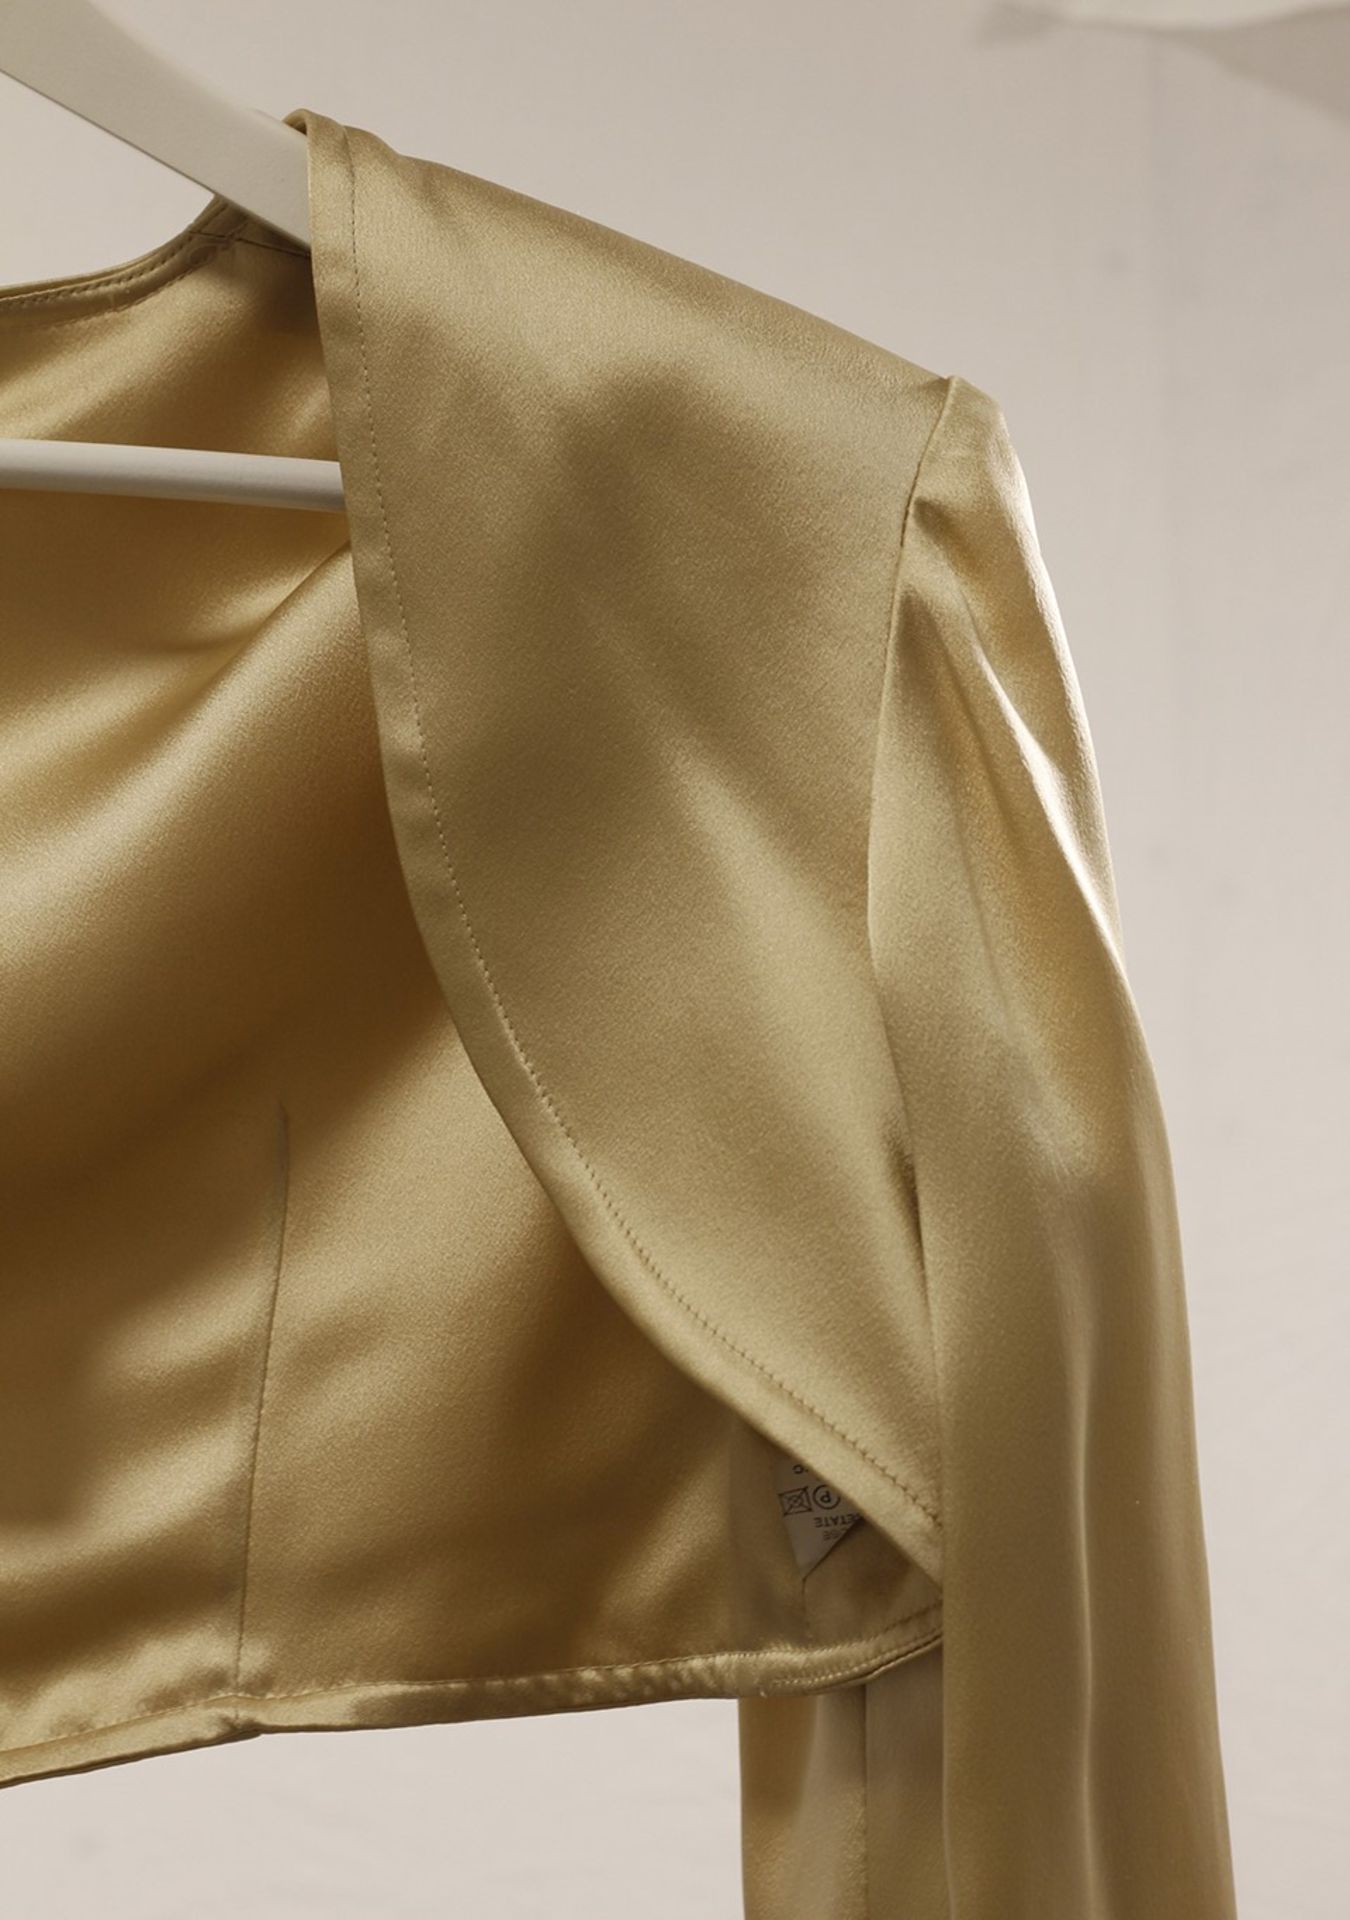 1 x Anne Belin Champagne Bolero - Size: 16 - Material: 50% Viscose, 50% Acetate - From a High End - Image 5 of 6